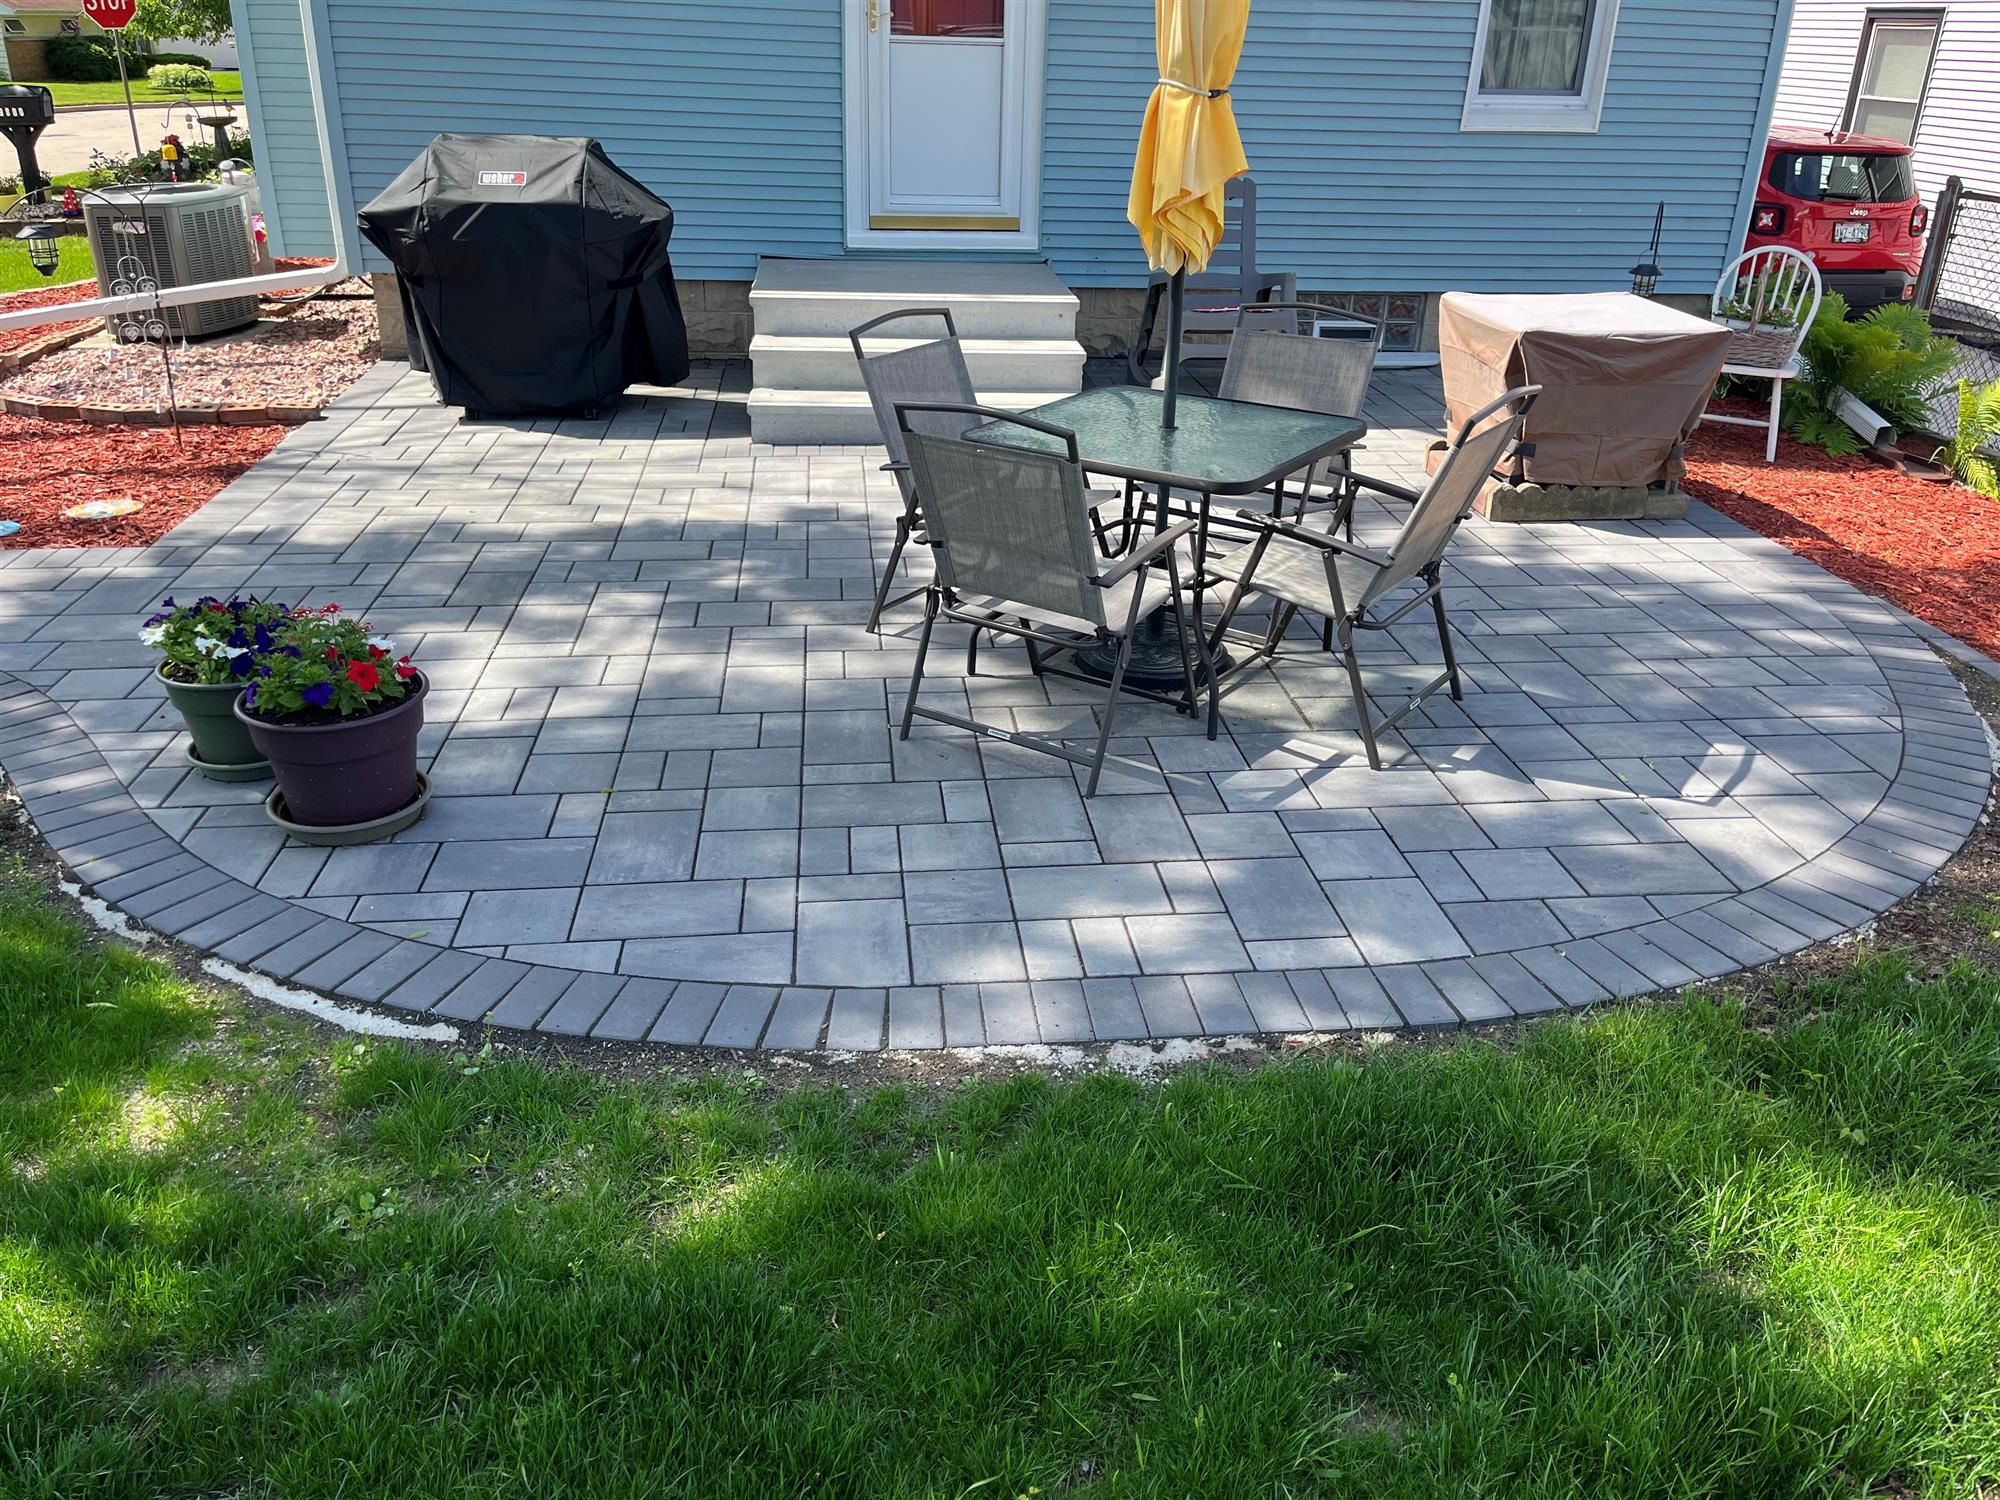 Artistic Patio with Intricate Paver Patterns